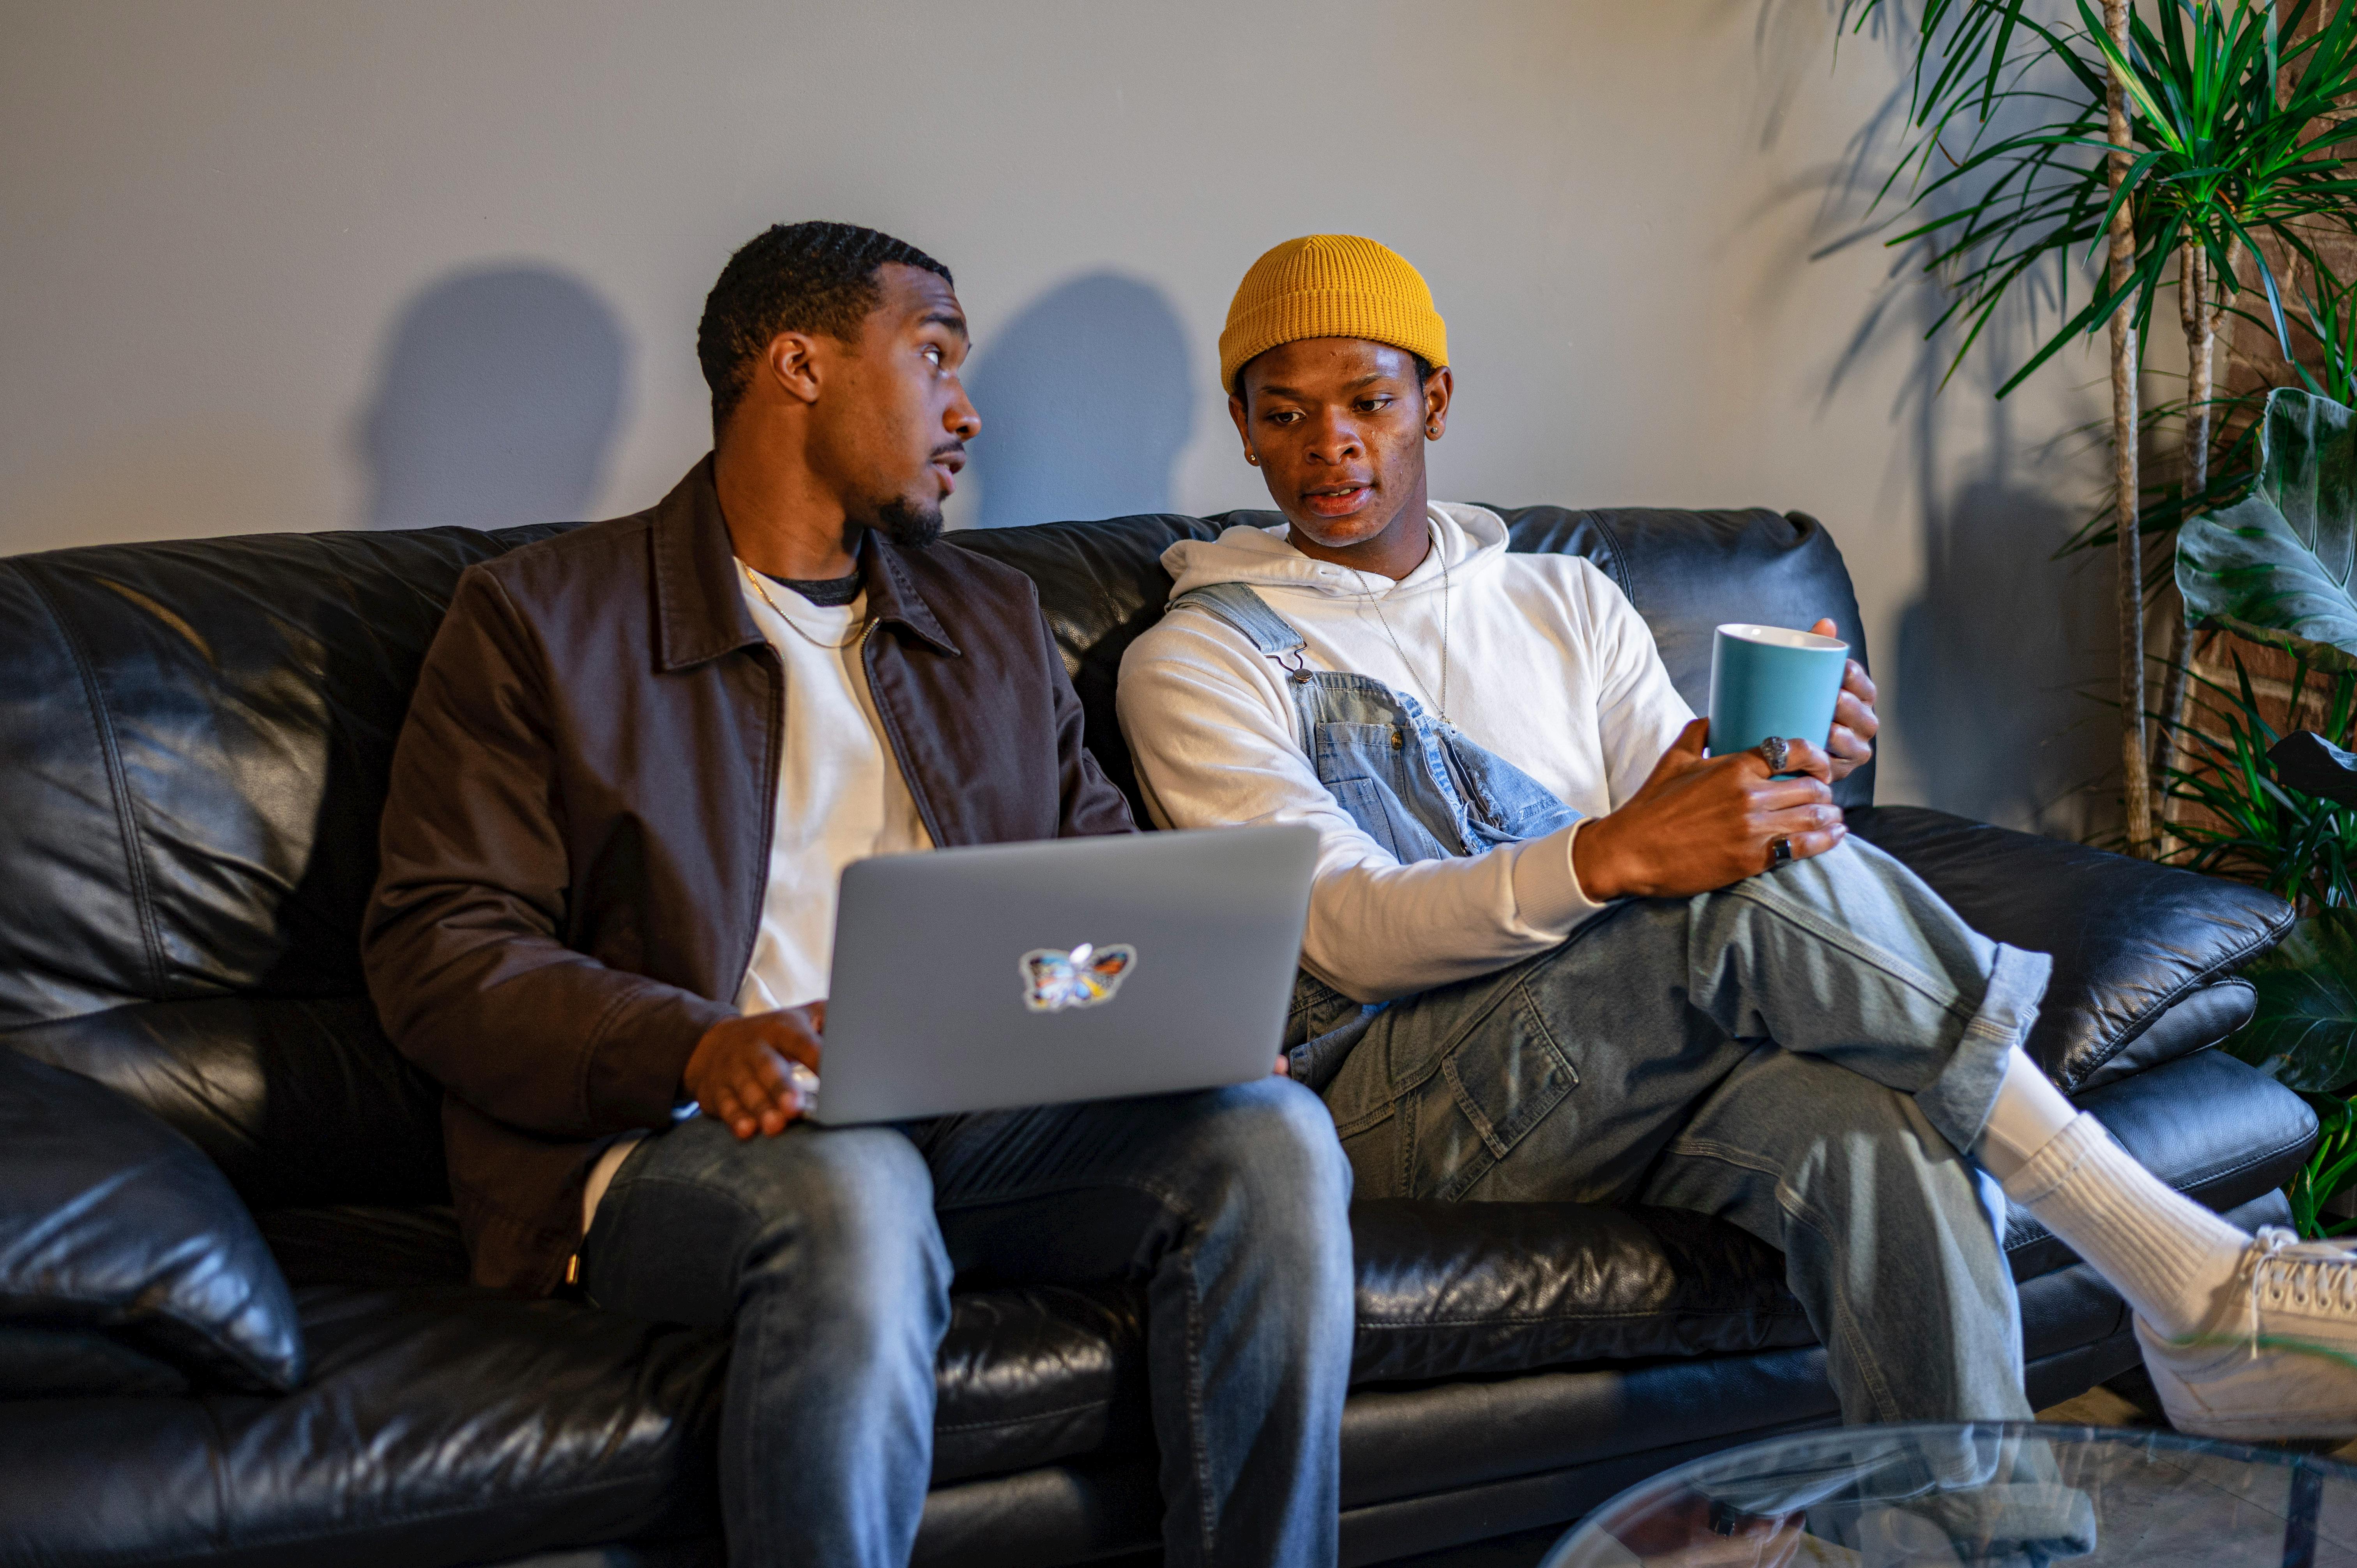 Men having a conversation while sitting on a couch | Source: Pexels